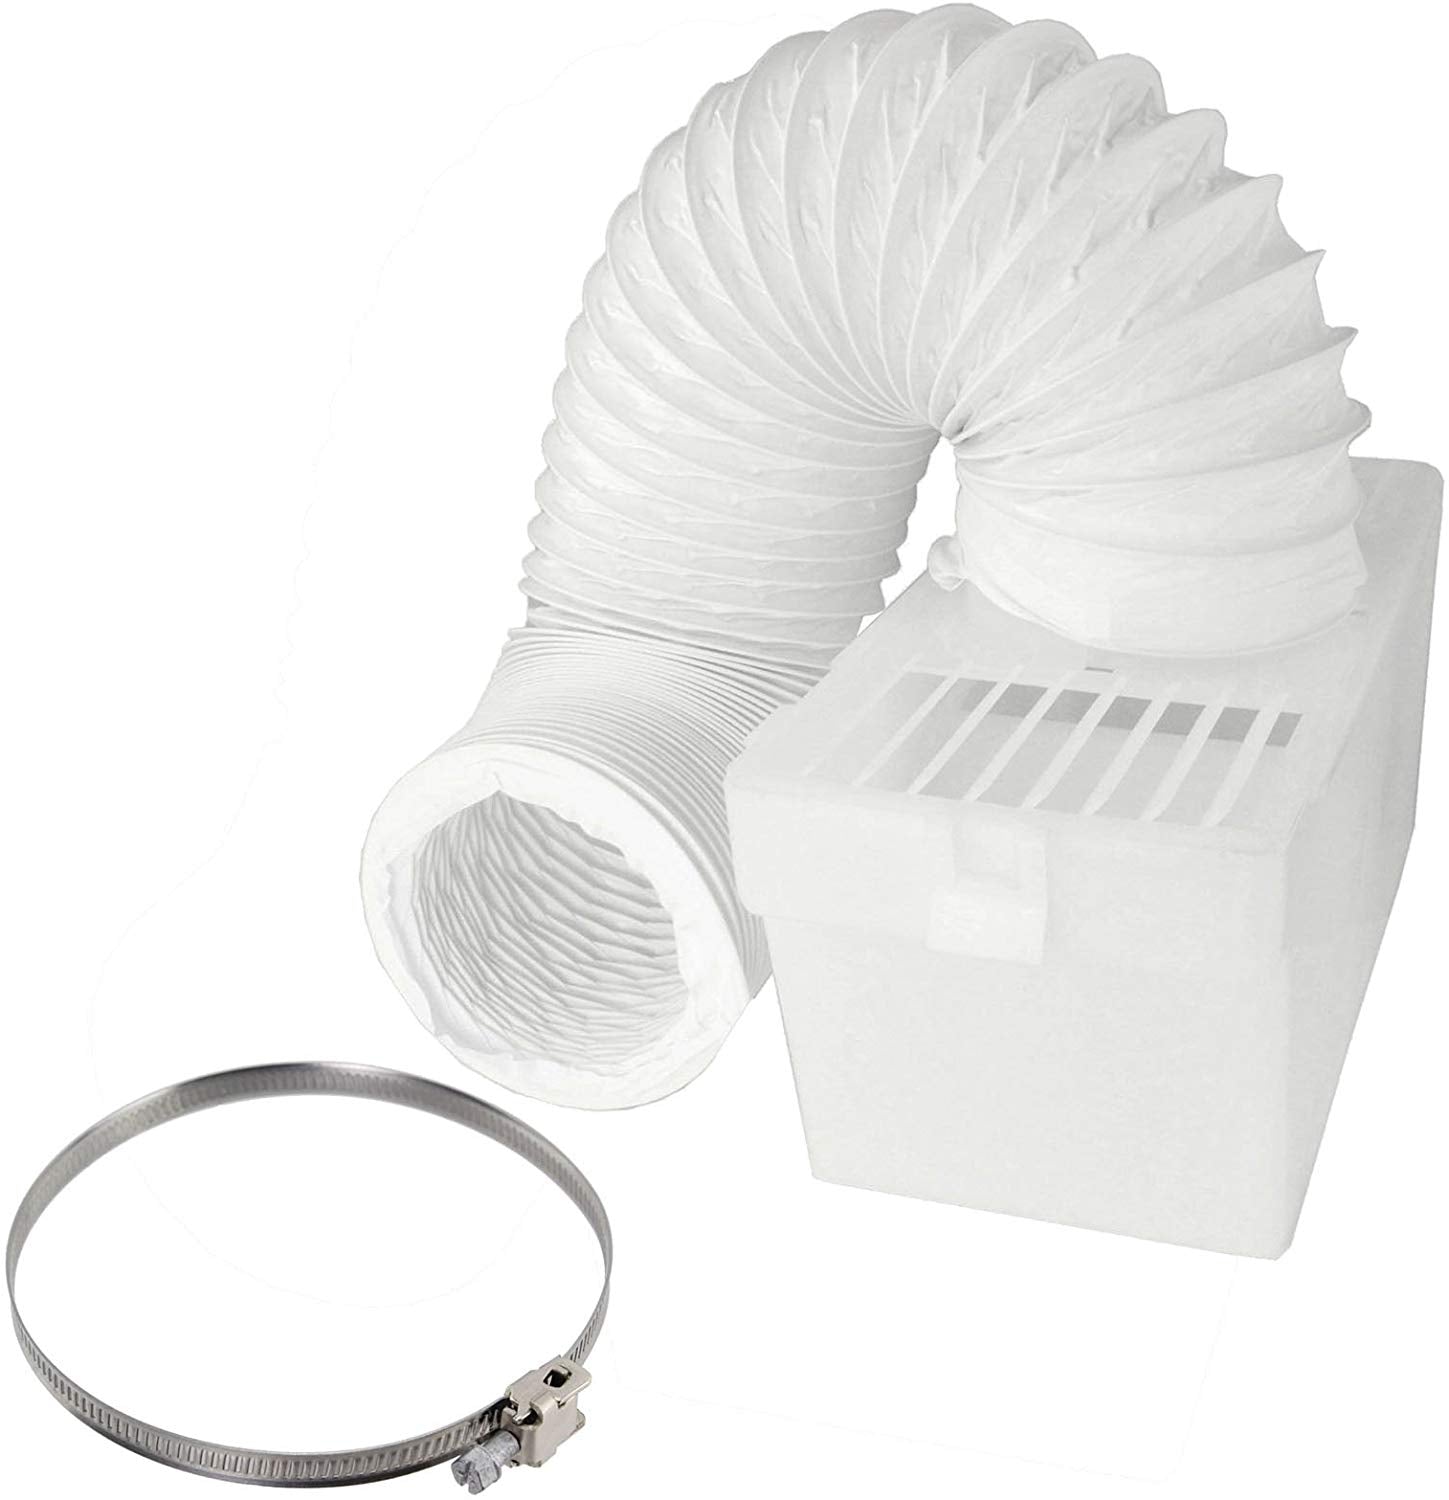 Condenser Vent Box & Hose Kit With Screw Clip for Creda Vented Tumble Dryer (4" / 100mm Diameter)